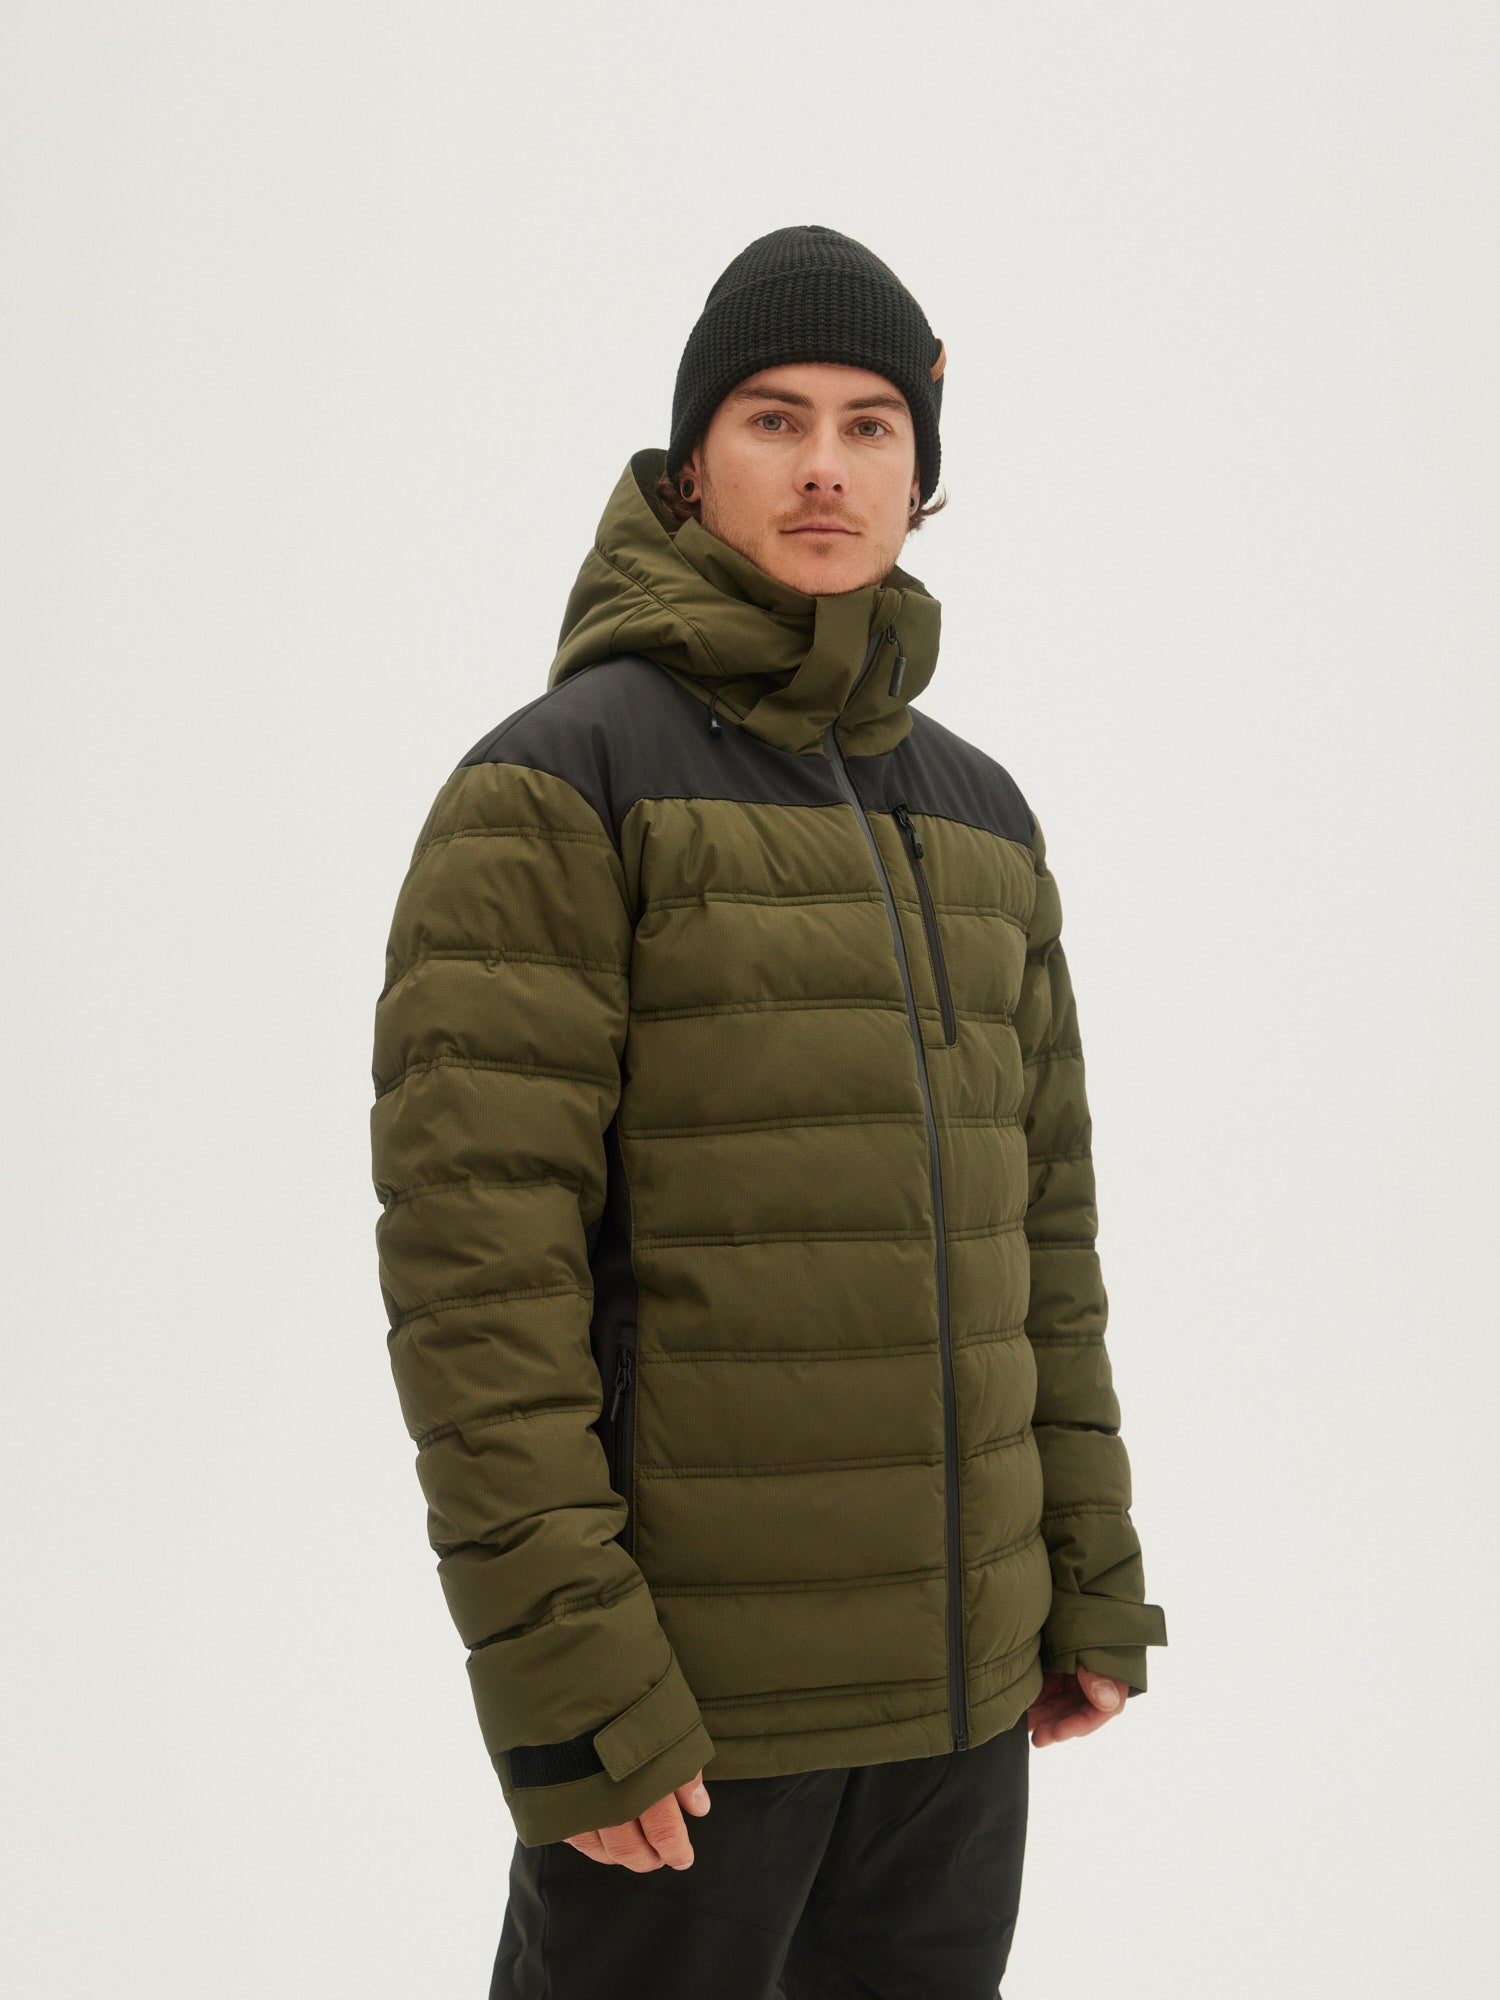 O'Neill Mens Igneous Jacket in Forest Night